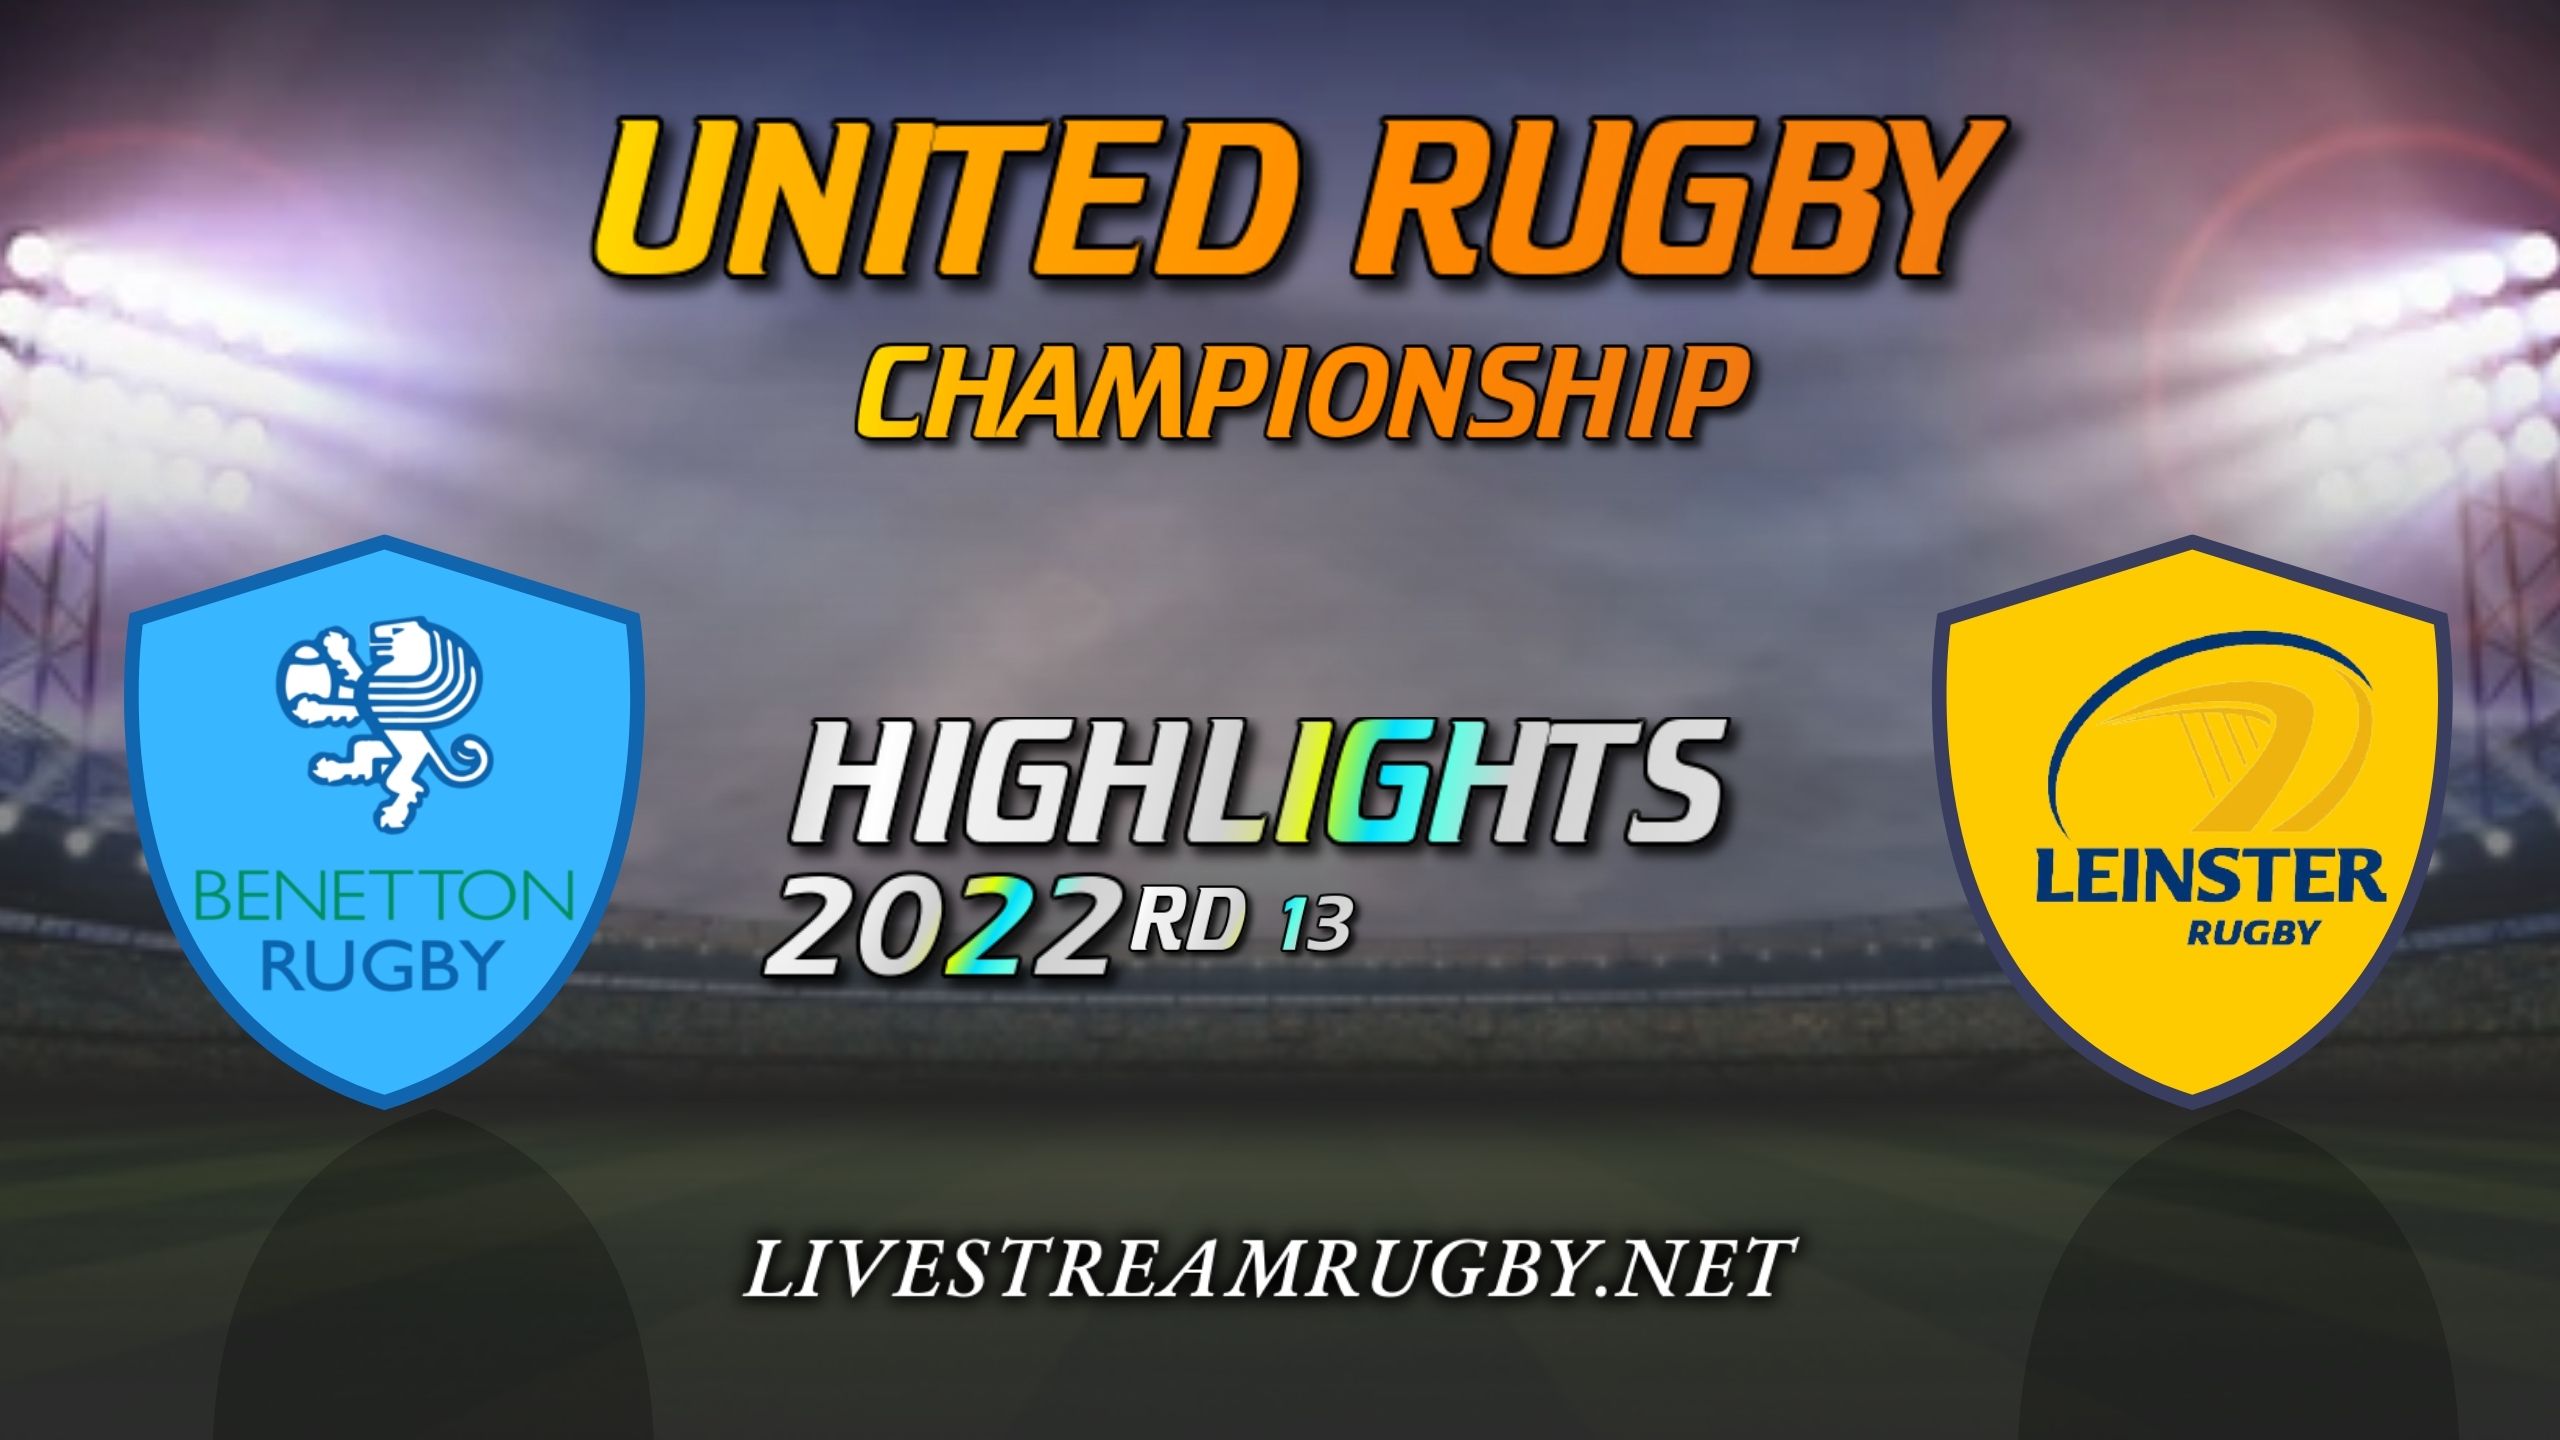 Benetton Vs Leinster Highlights 2022 Rd 13 United Rugby